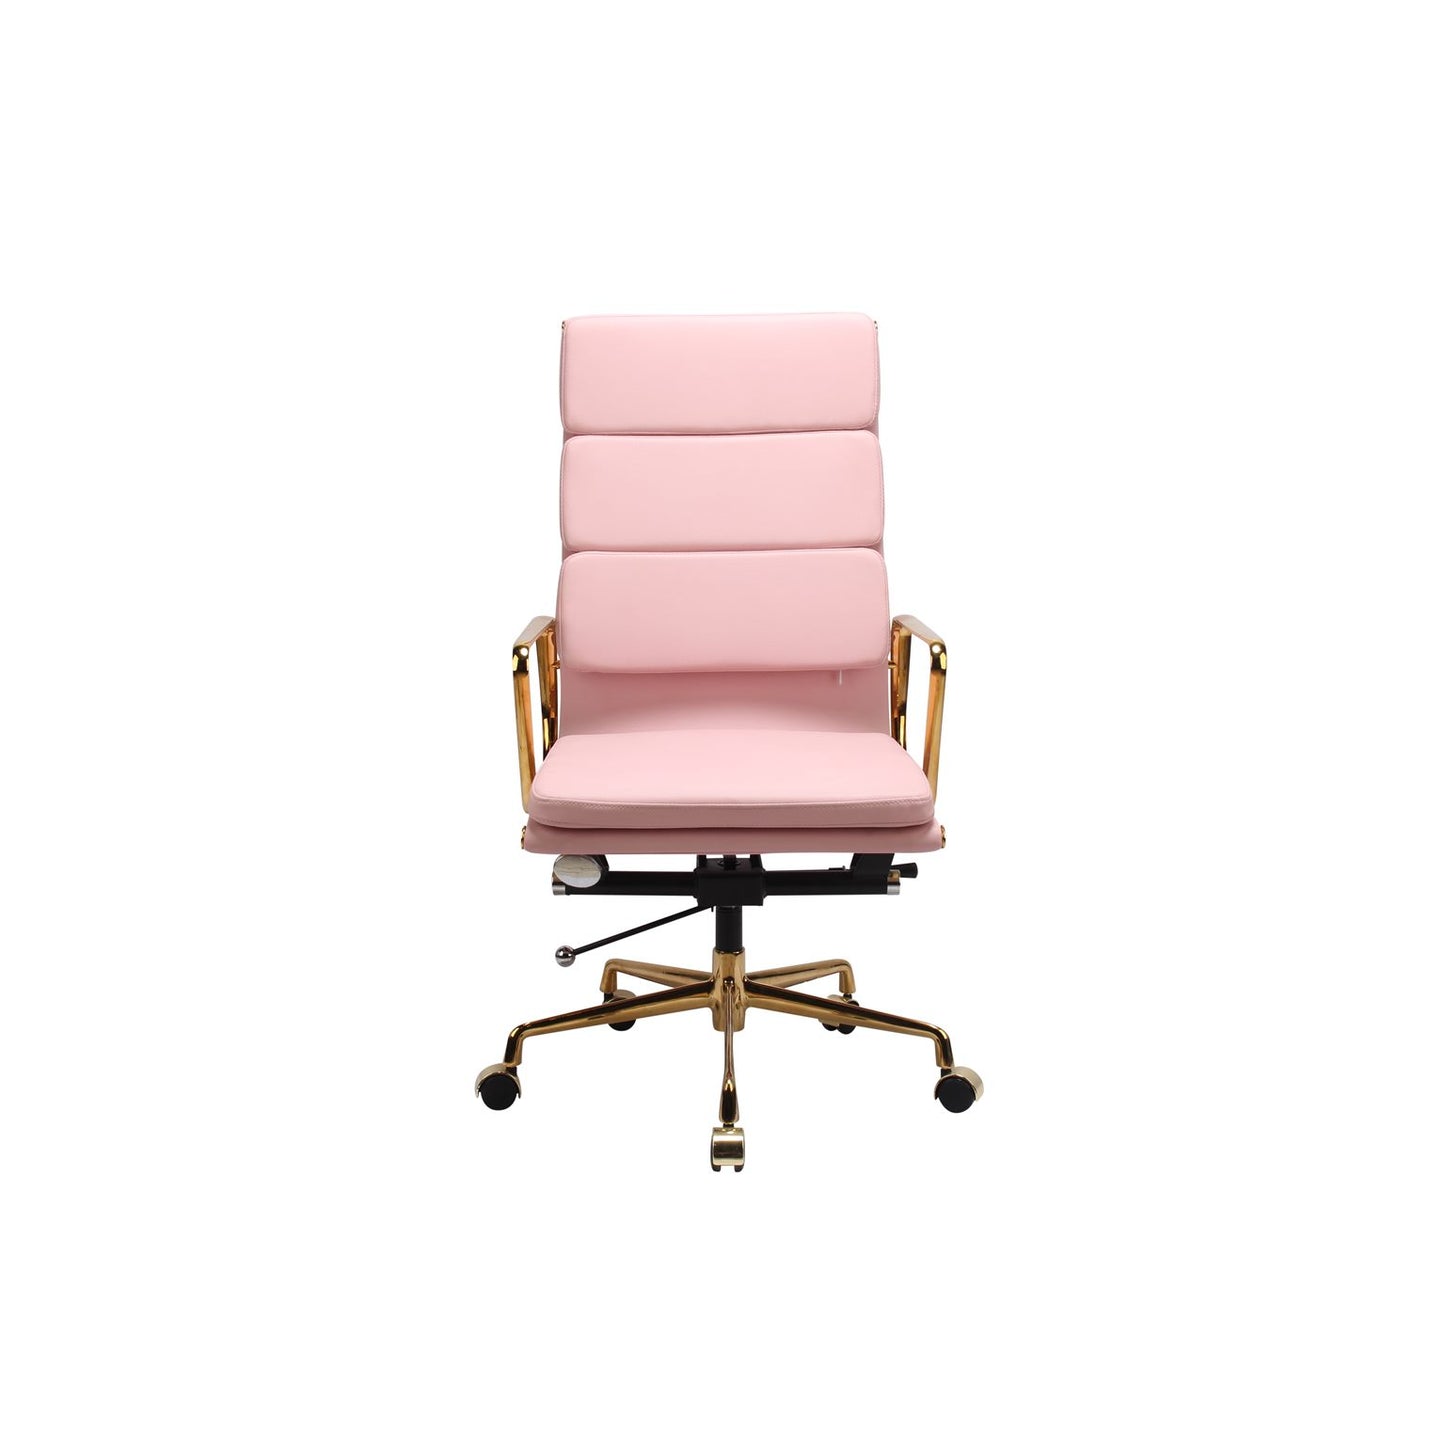 RP Genuine Leather Eames Soft Pad Office Chair, Pink color in stock now